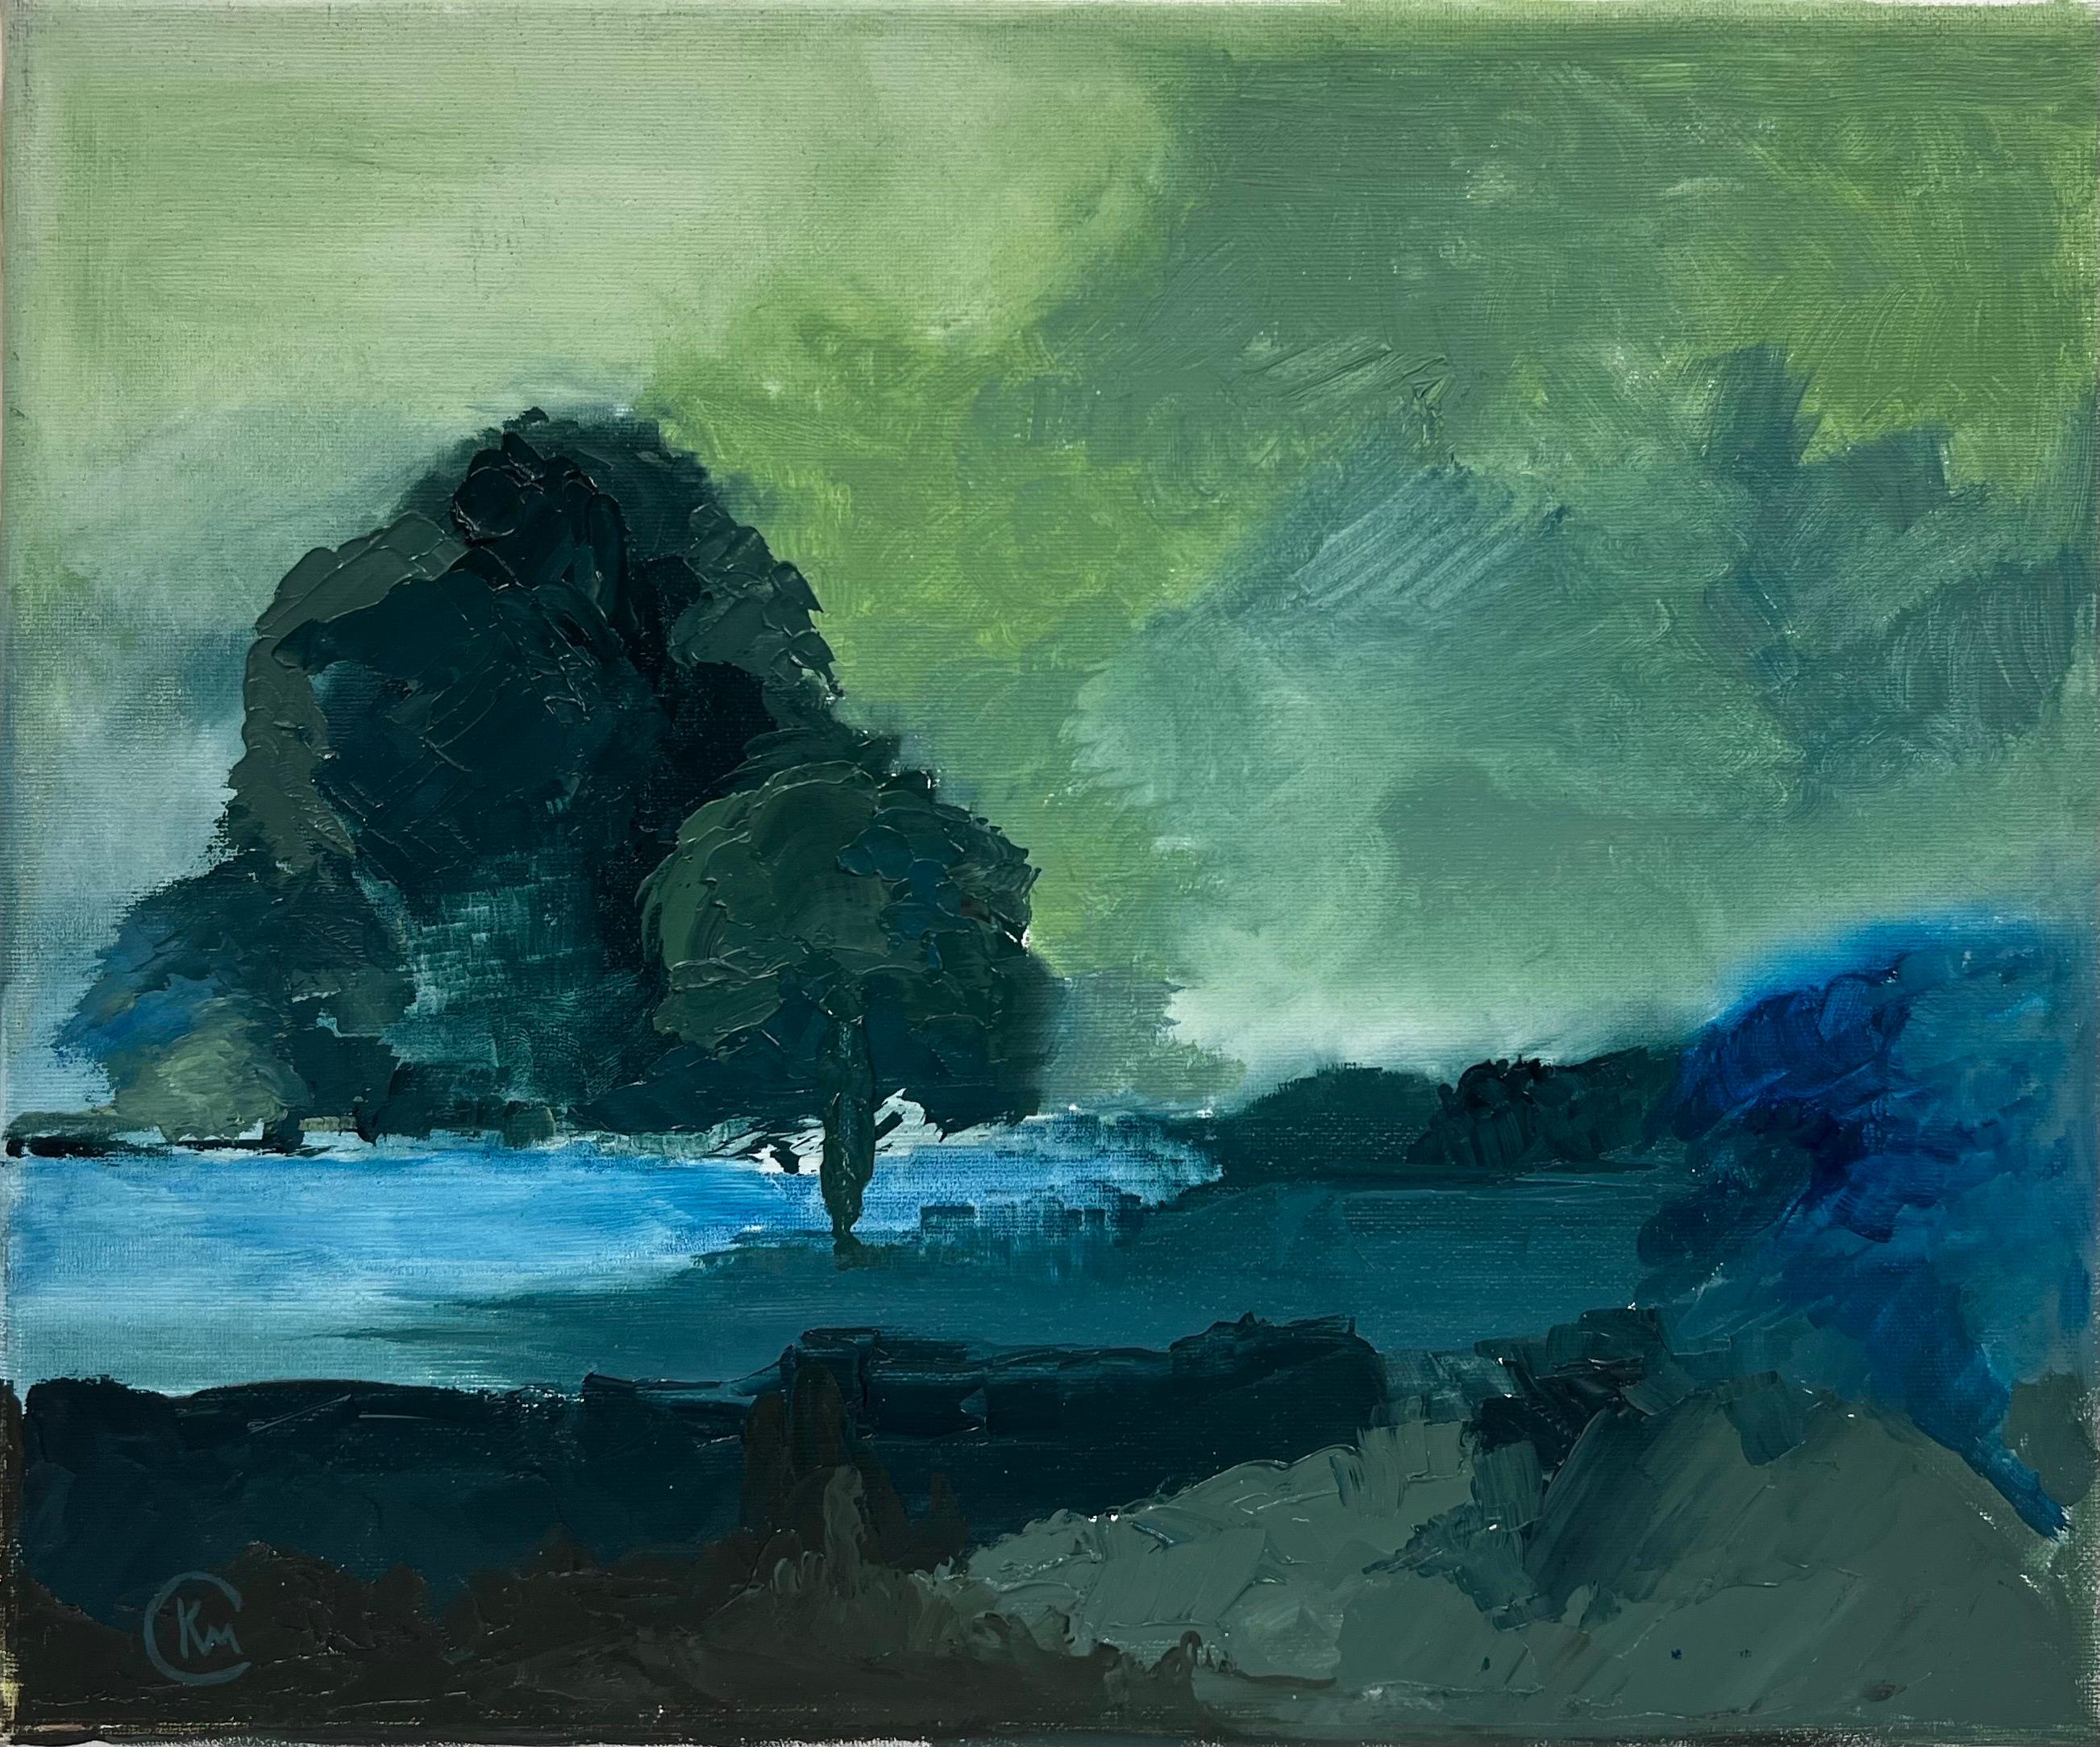 British contemporary Landscape Painting - Atmospheric Moody Blue Landscape with Tree & Pond Brooding Skies, modern art